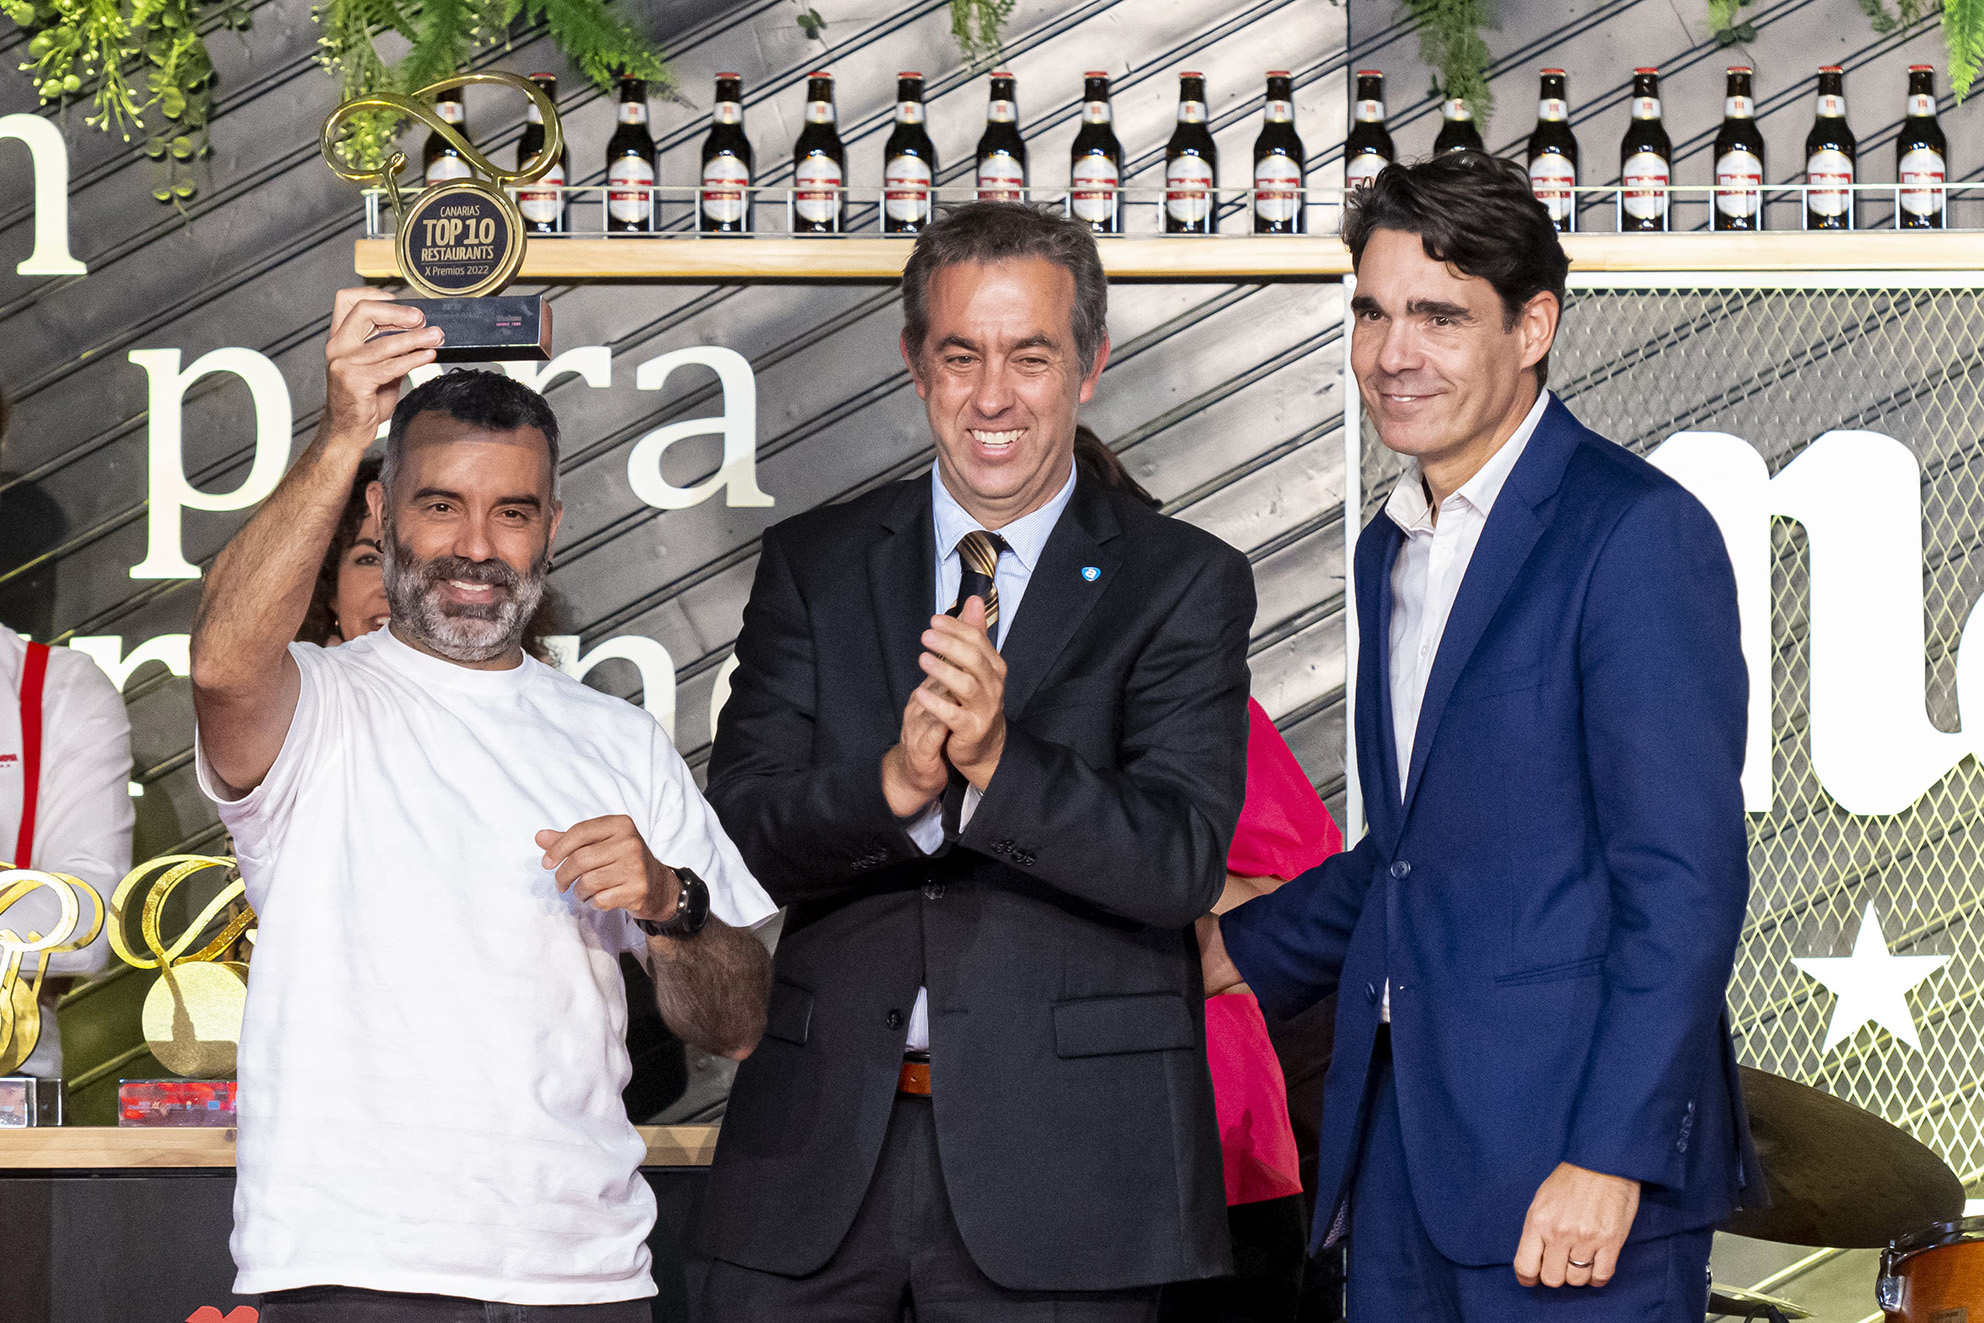 Donaire, best hotel restaurant in the Canary Islands 2021